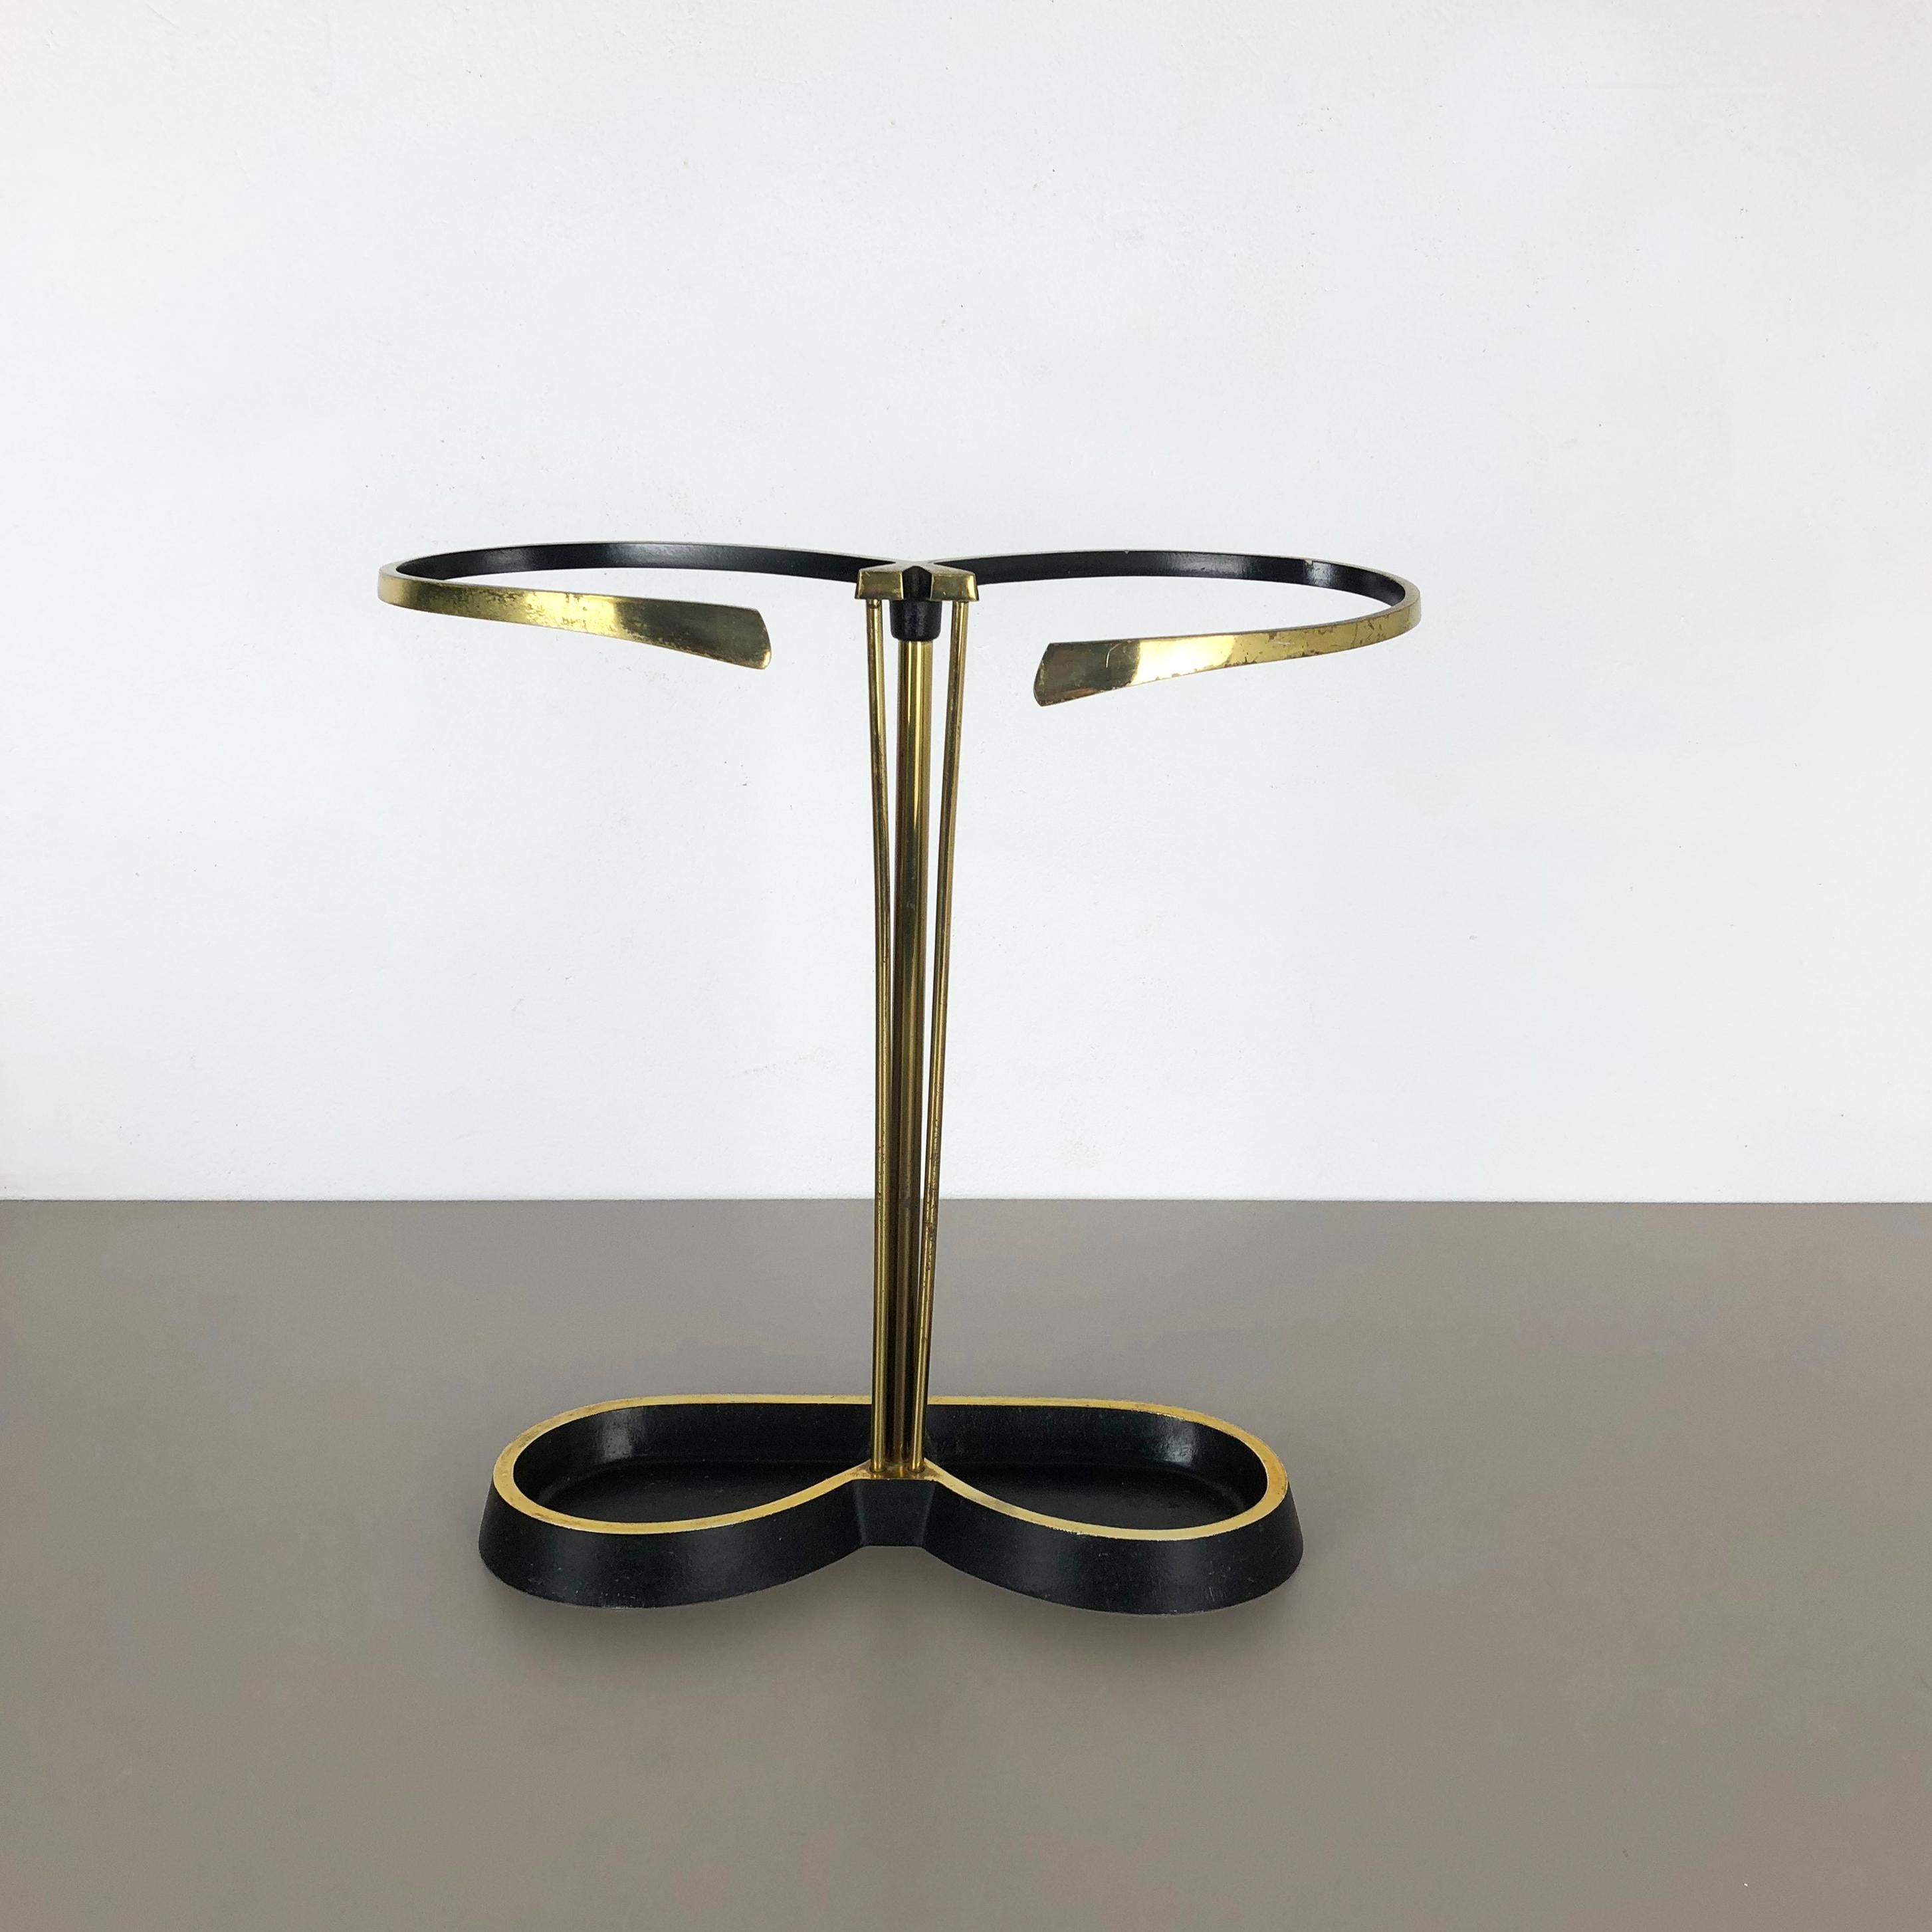 Article:

Bauhaus umbrella stand


Origin:

Germany


Age:

1950s


This original vintage Bauhaus style umbrella stand was produced in the 1950s in Germany. It is made of solid metal with brass applications at the top and upright stand, the heavy